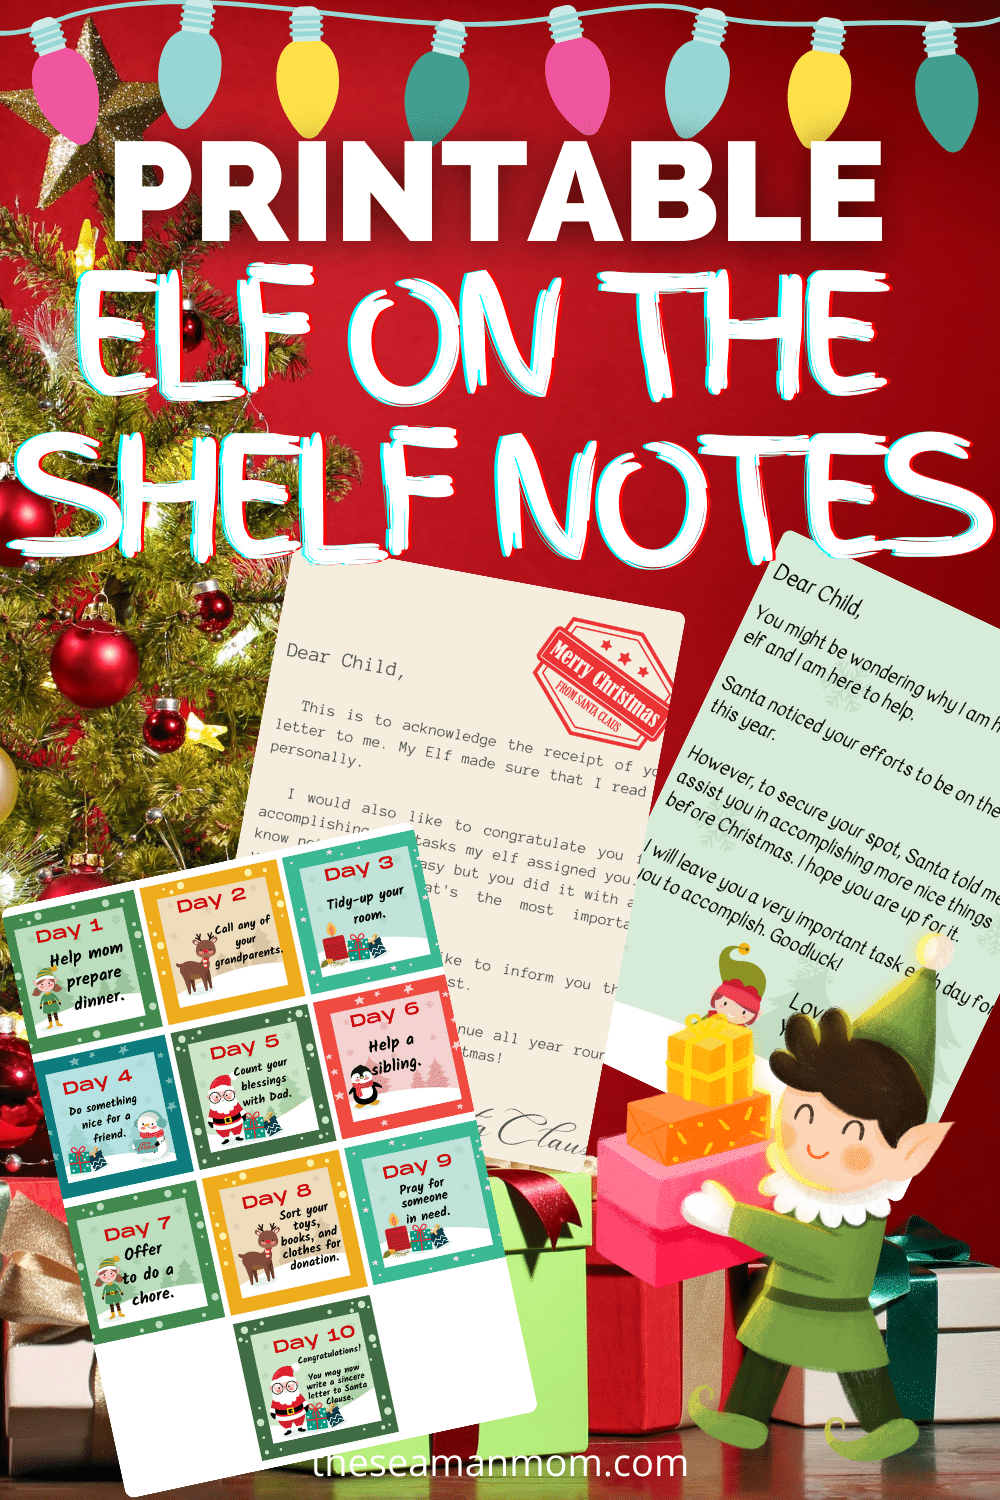 Elf on the Shelf to the Rescue! Free Elf on the shelf printable notes